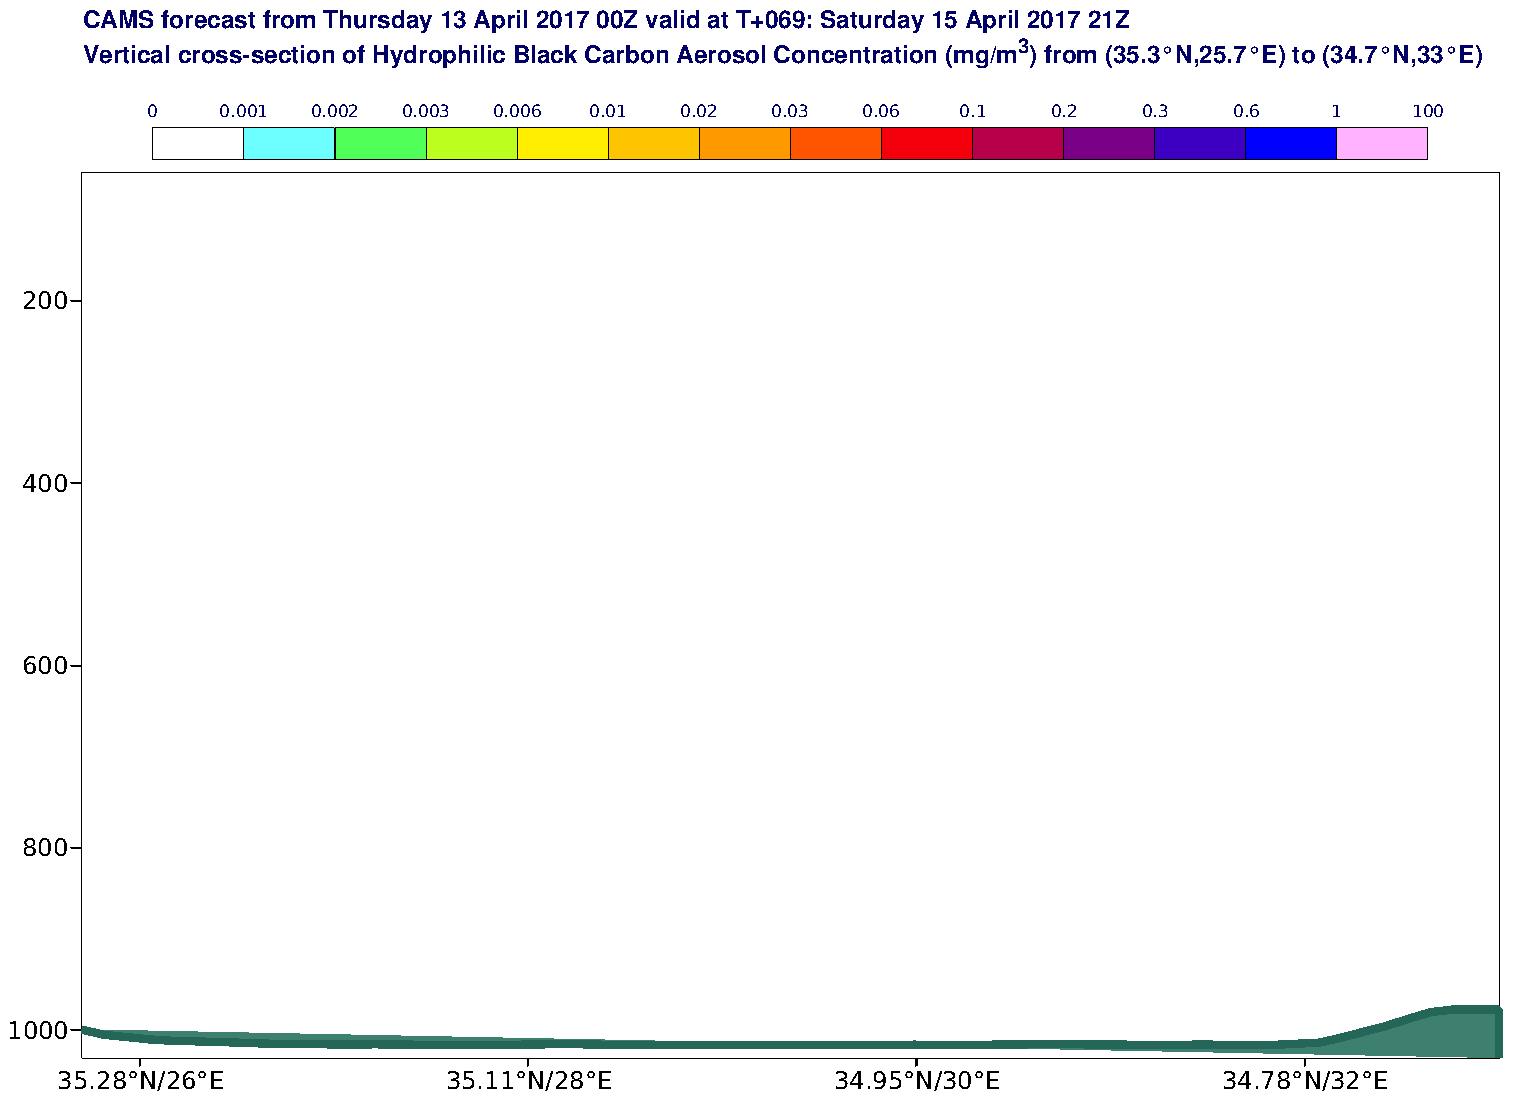 Vertical cross-section of Hydrophilic Black Carbon Aerosol Concentration (mg/m3) valid at T69 - 2017-04-15 21:00